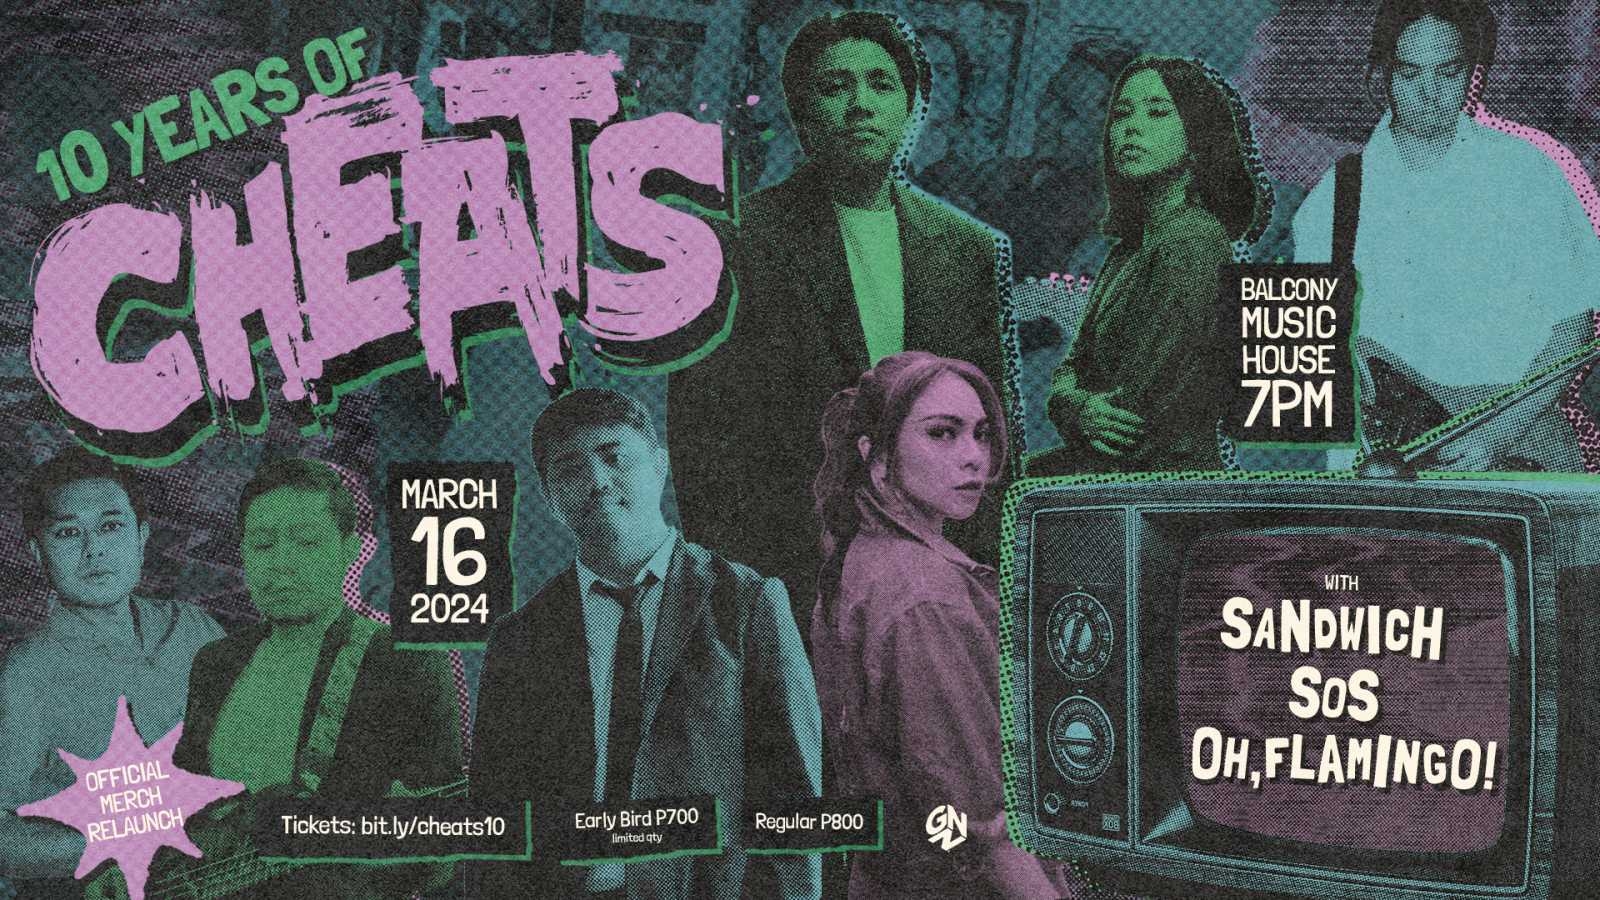 Filipino indie-rock band CHEATS to celebrate 10th anniversary with intimate show